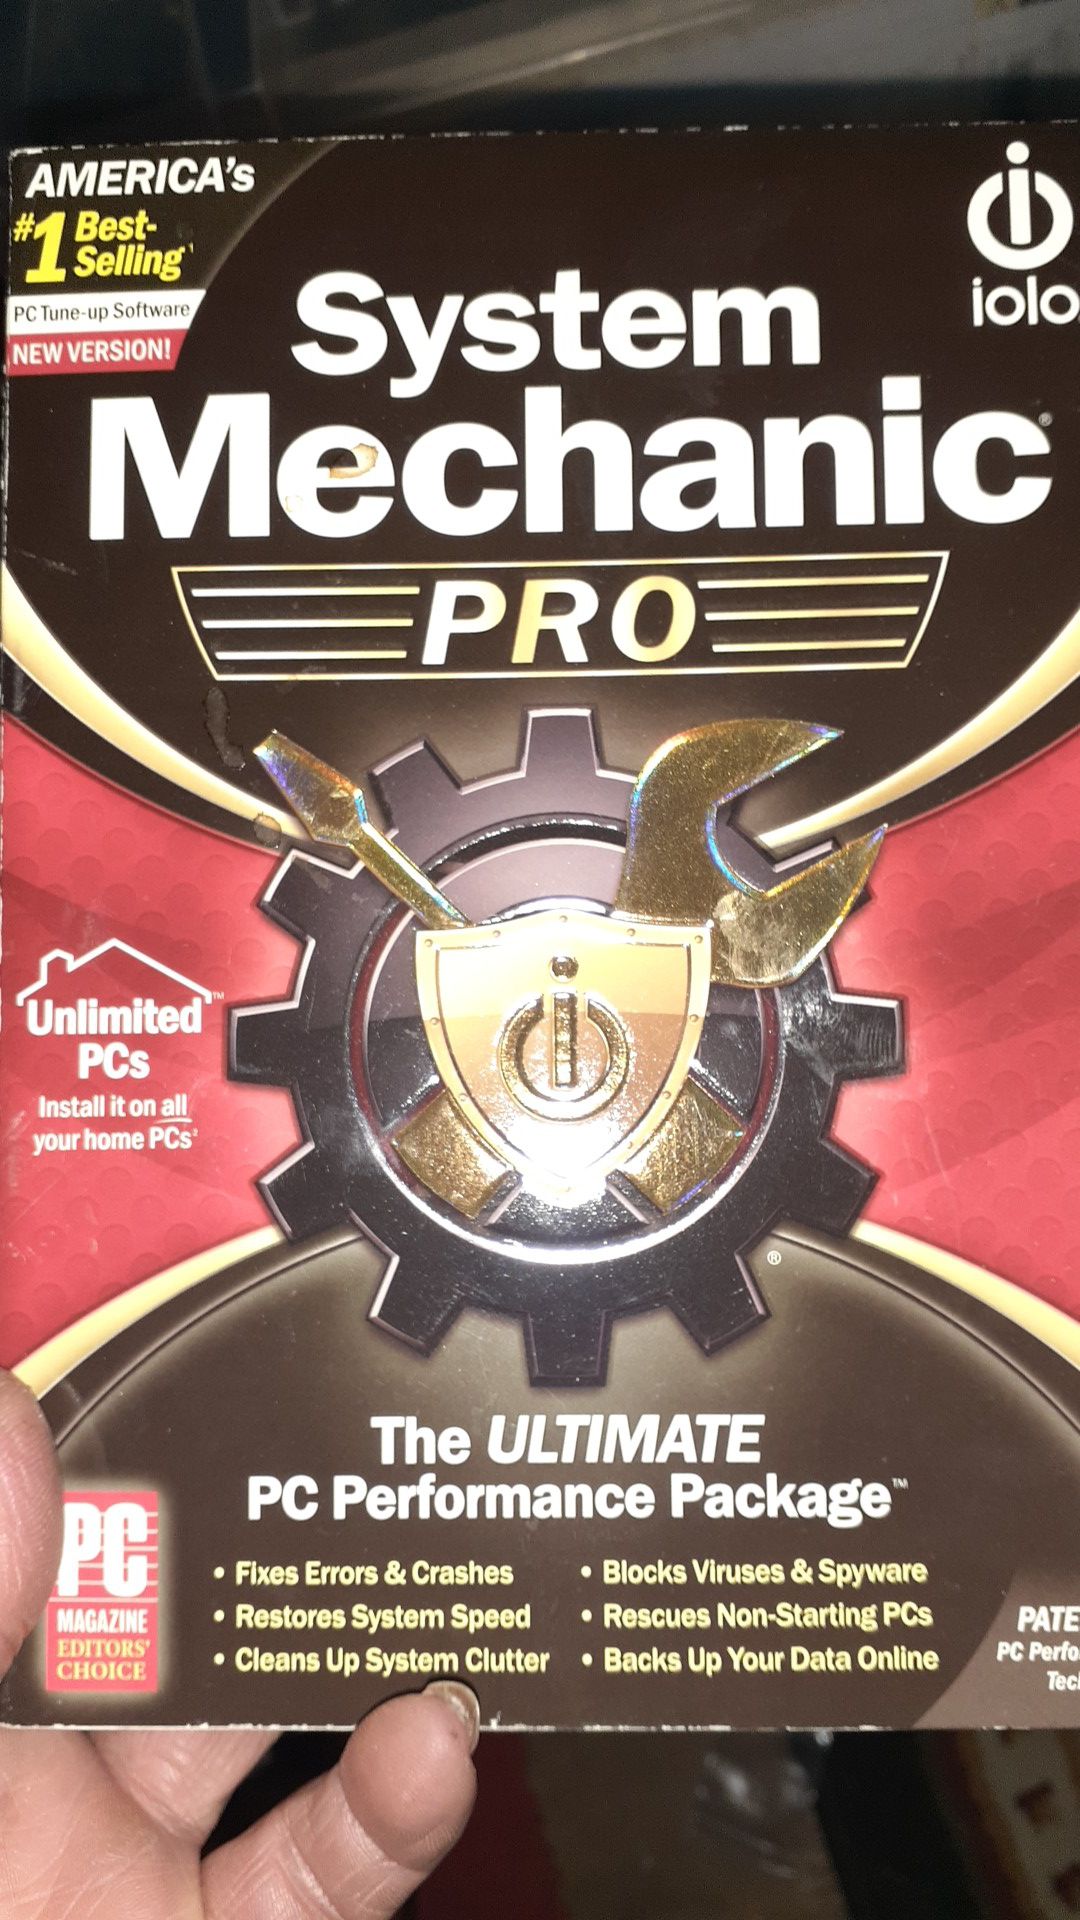 System Mechanic Pro the ultimate PC performance package software